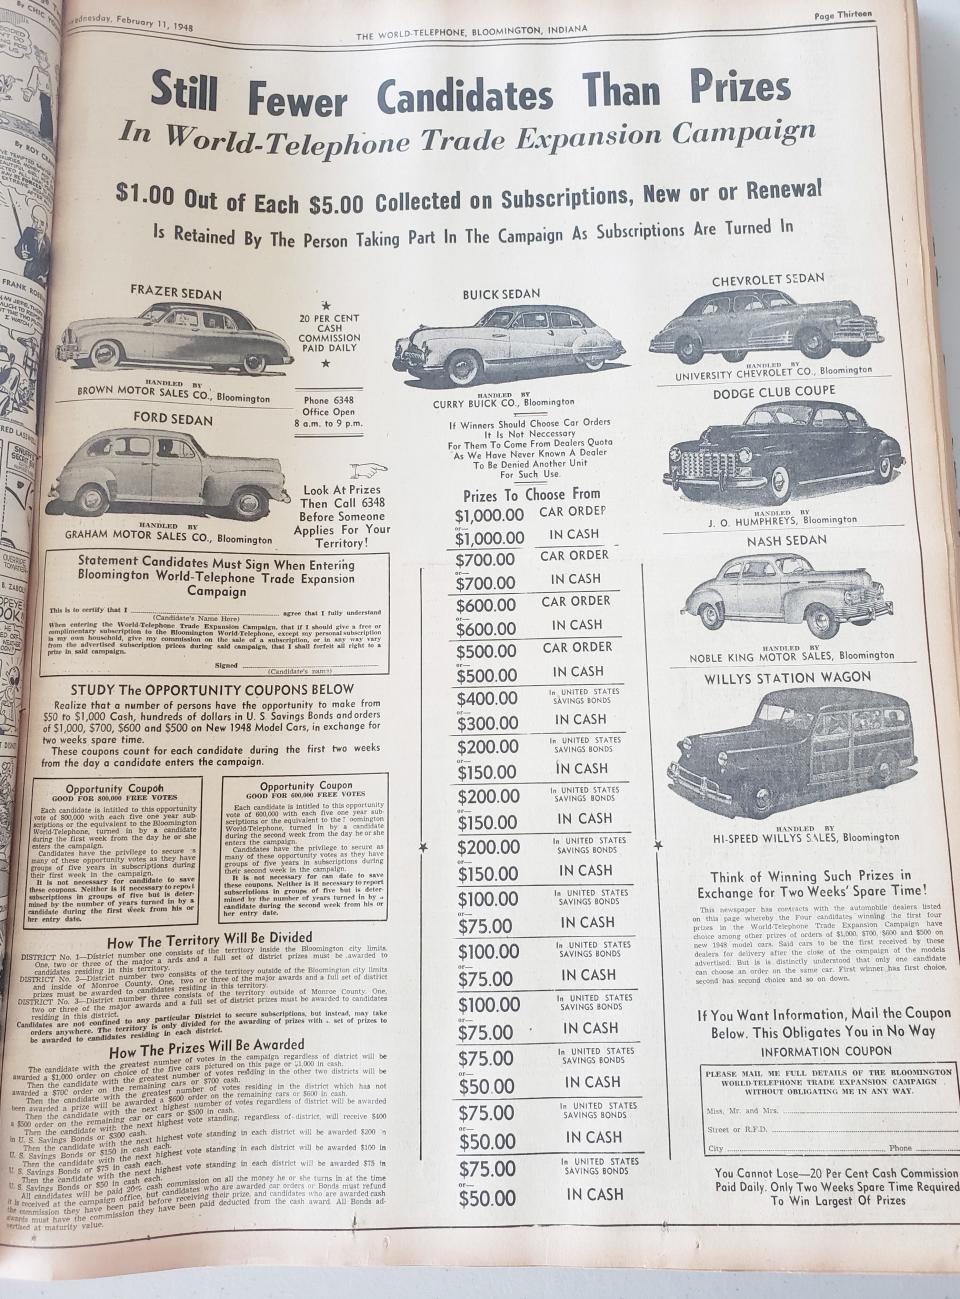 A World Telephone newspaper ad from 1948